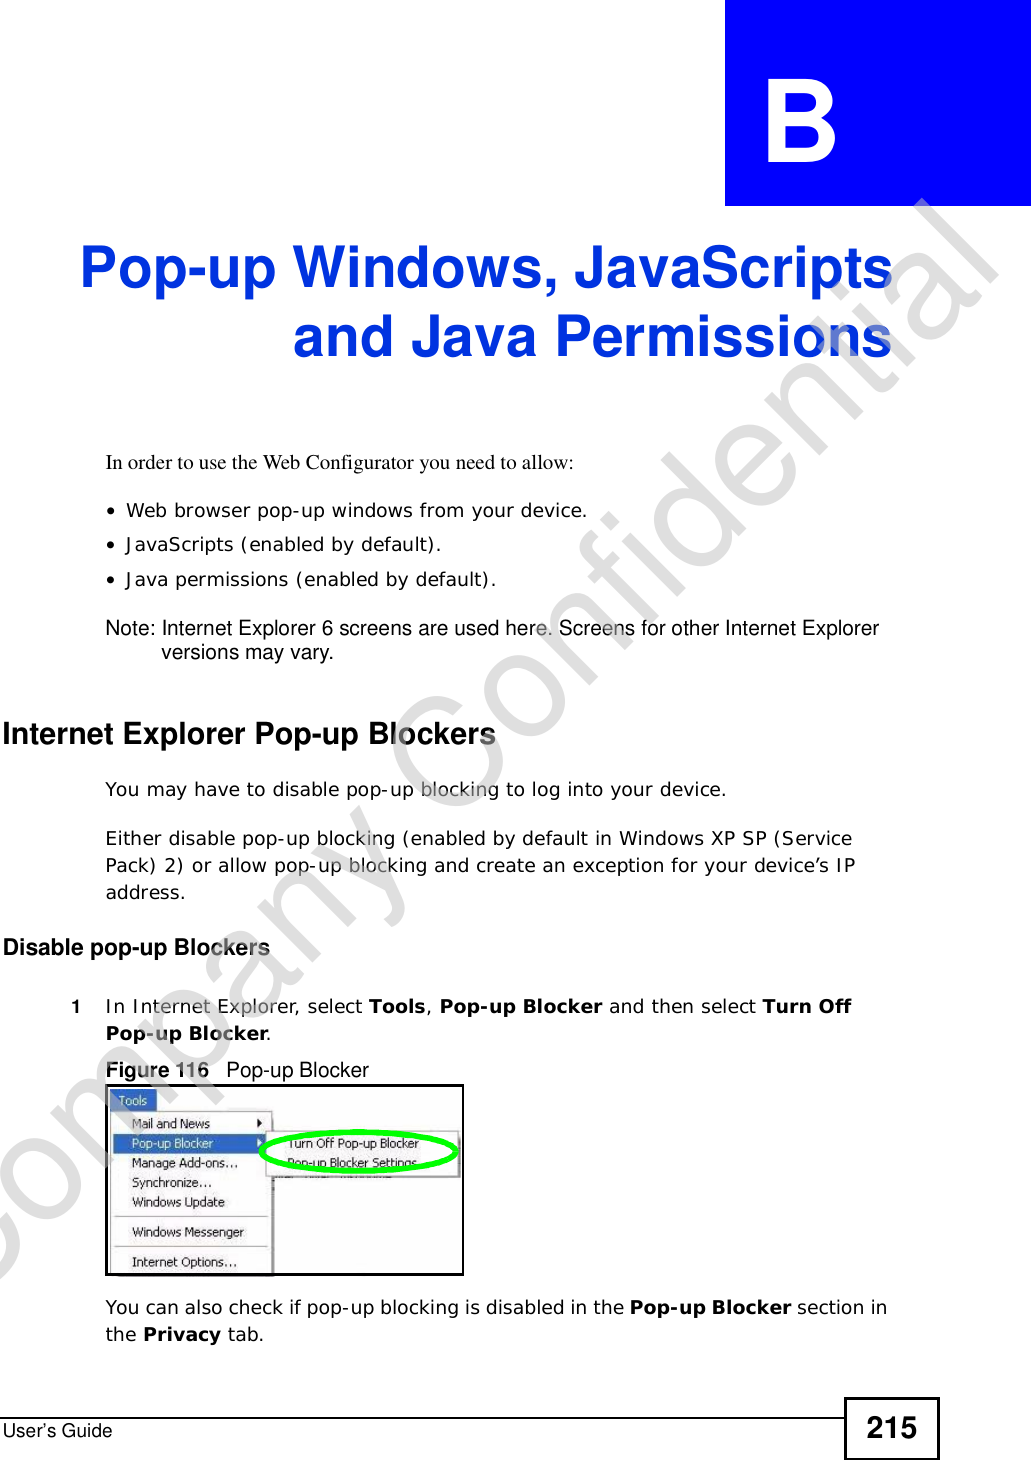 User’s Guide 215APPENDIX  B Pop-up Windows, JavaScriptsand Java PermissionsIn order to use the Web Configurator you need to allow:•Web browser pop-up windows from your device.•JavaScripts (enabled by default).•Java permissions (enabled by default).Note: Internet Explorer 6 screens are used here. Screens for other Internet Explorer versions may vary.Internet Explorer Pop-up BlockersYou may have to disable pop-up blocking to log into your device. Either disable pop-up blocking (enabled by default in Windows XP SP (Service Pack) 2) or allow pop-up blocking and create an exception for your device’s IP address.Disable pop-up Blockers1In Internet Explorer, select Tools,Pop-up Blocker and then select Turn Off Pop-up Blocker.Figure 116   Pop-up BlockerYou can also check if pop-up blocking is disabled in the Pop-up Blocker section in the Privacy tab. Company Confidential